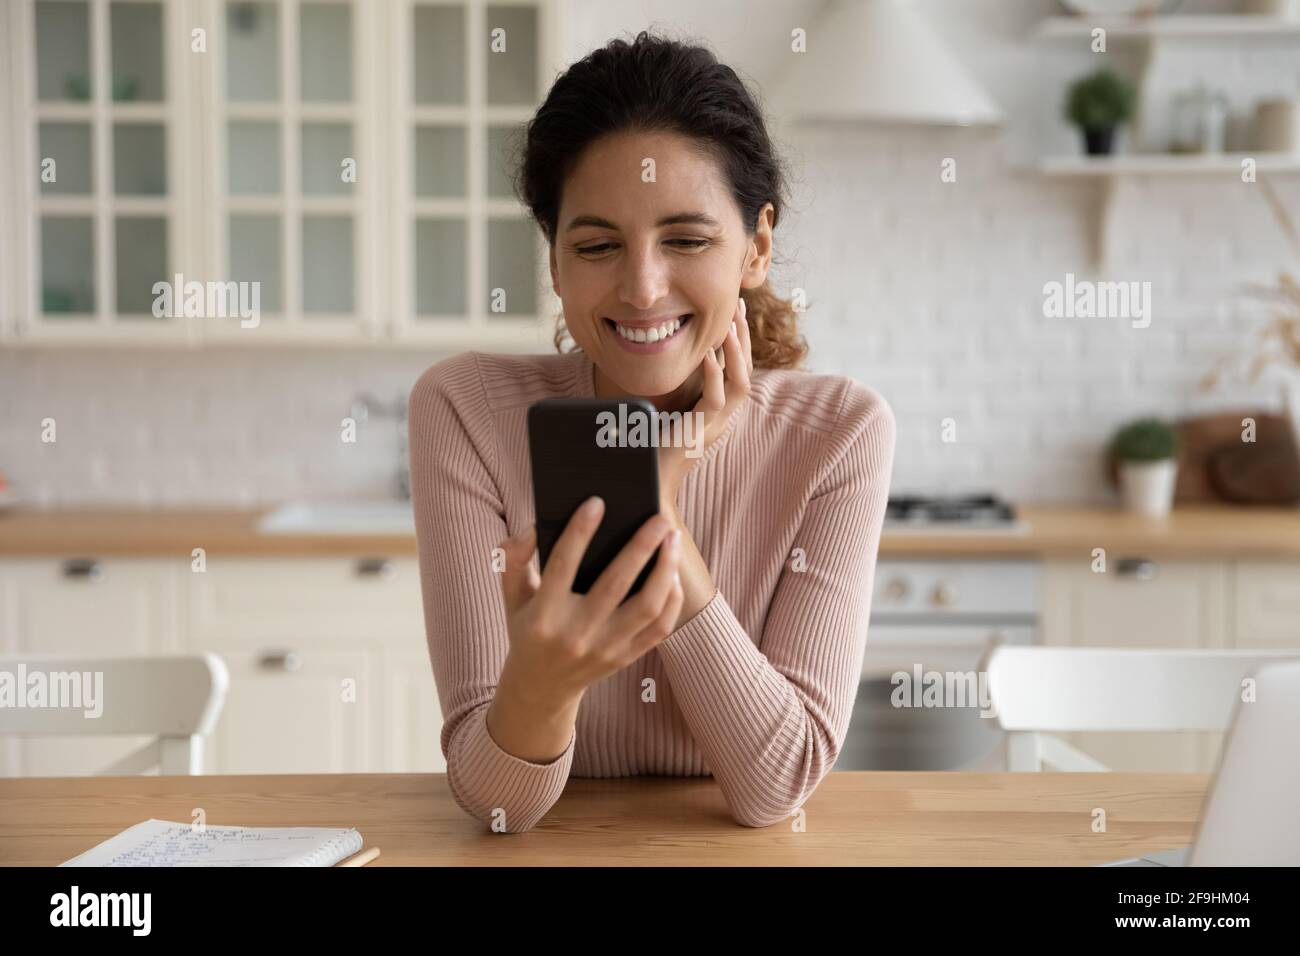 Cheerful latina woman spend time at social network using phone Stock Photo